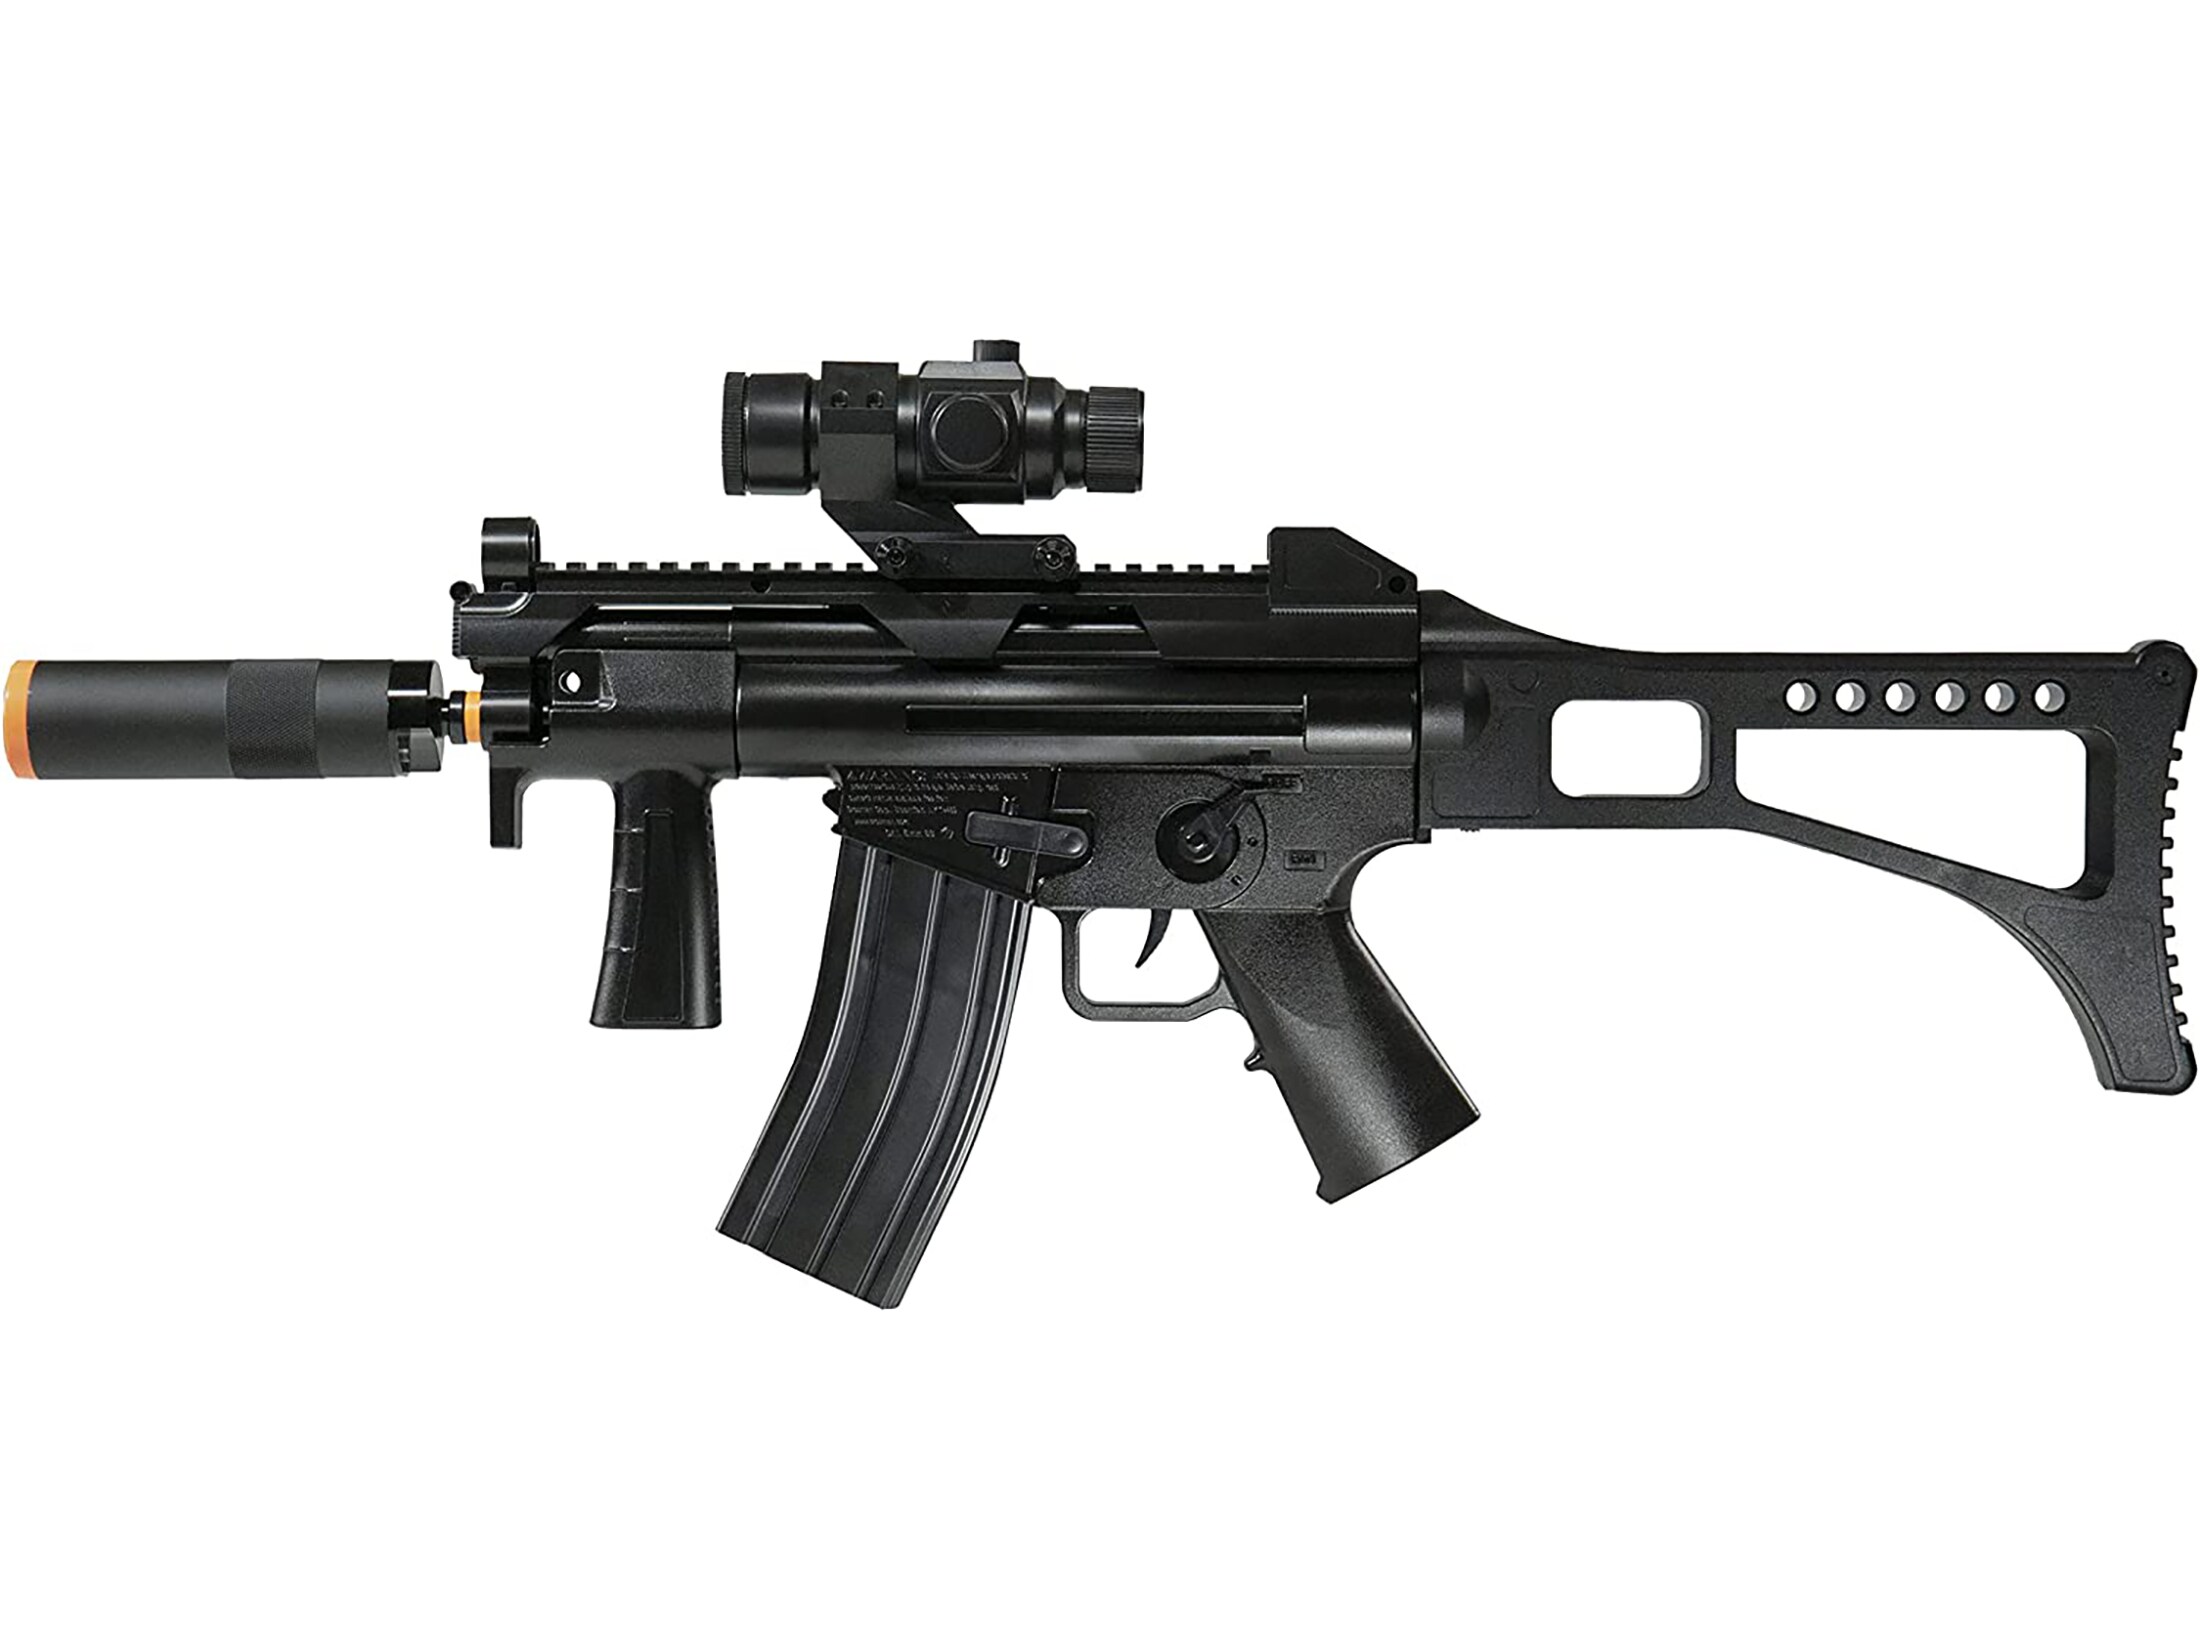 Game Face TACR91 Airsoft Rifle 6mm BB Battery Powered Full-Auto Combo For Sale